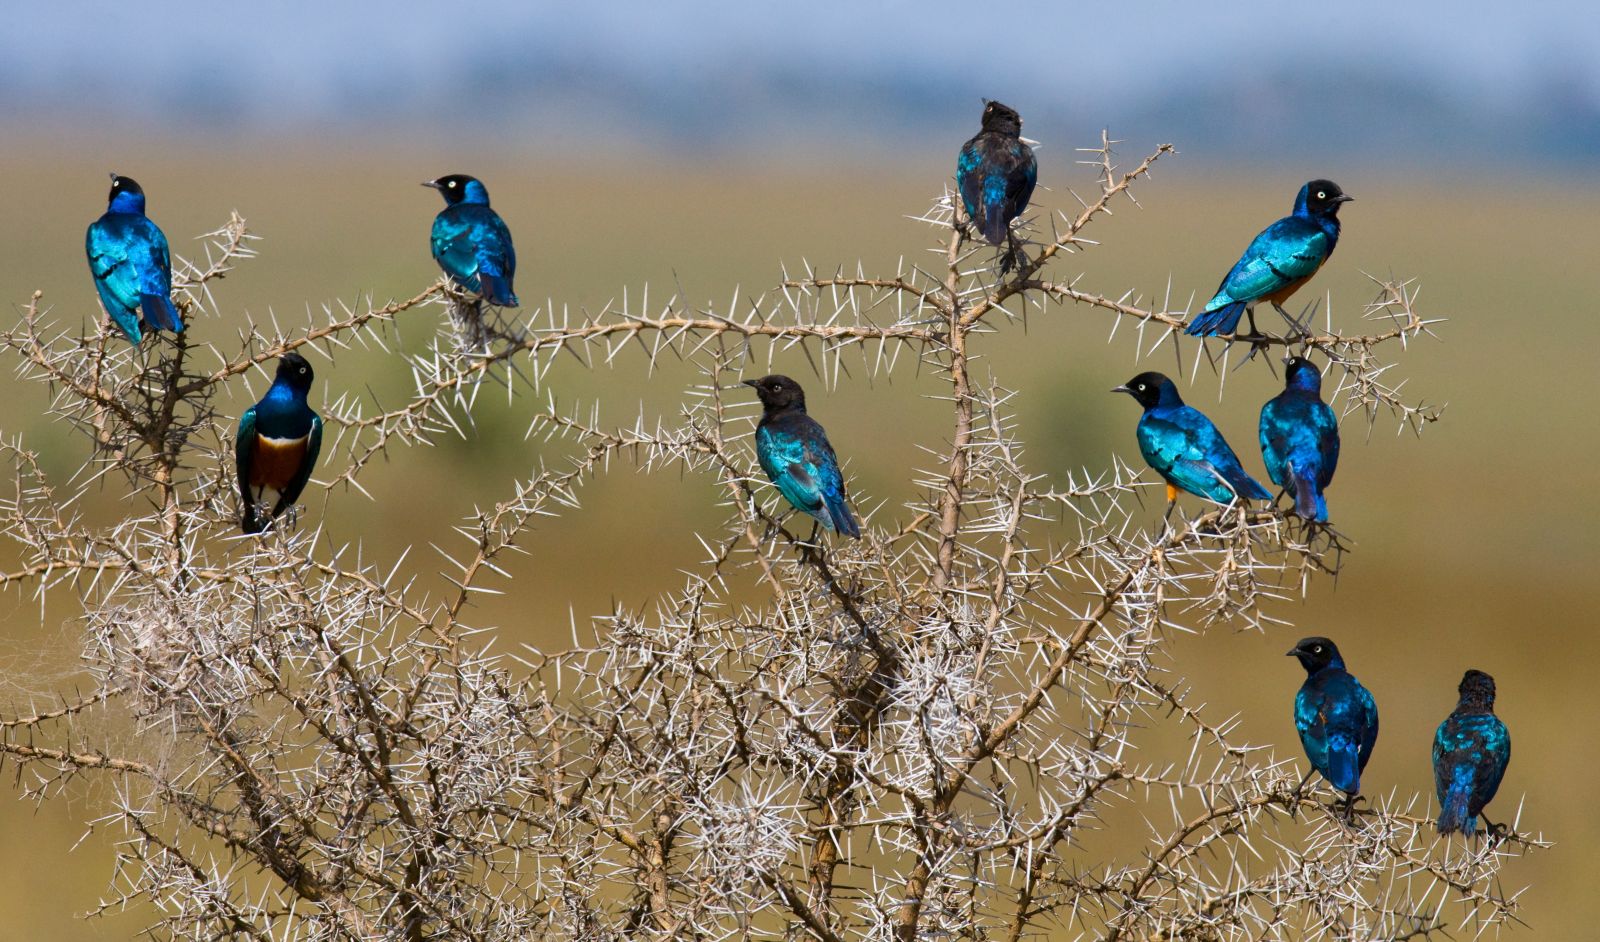 Bright blue starlings perched at the top of a tree in the Ngorogoro Crater region of Tanzania